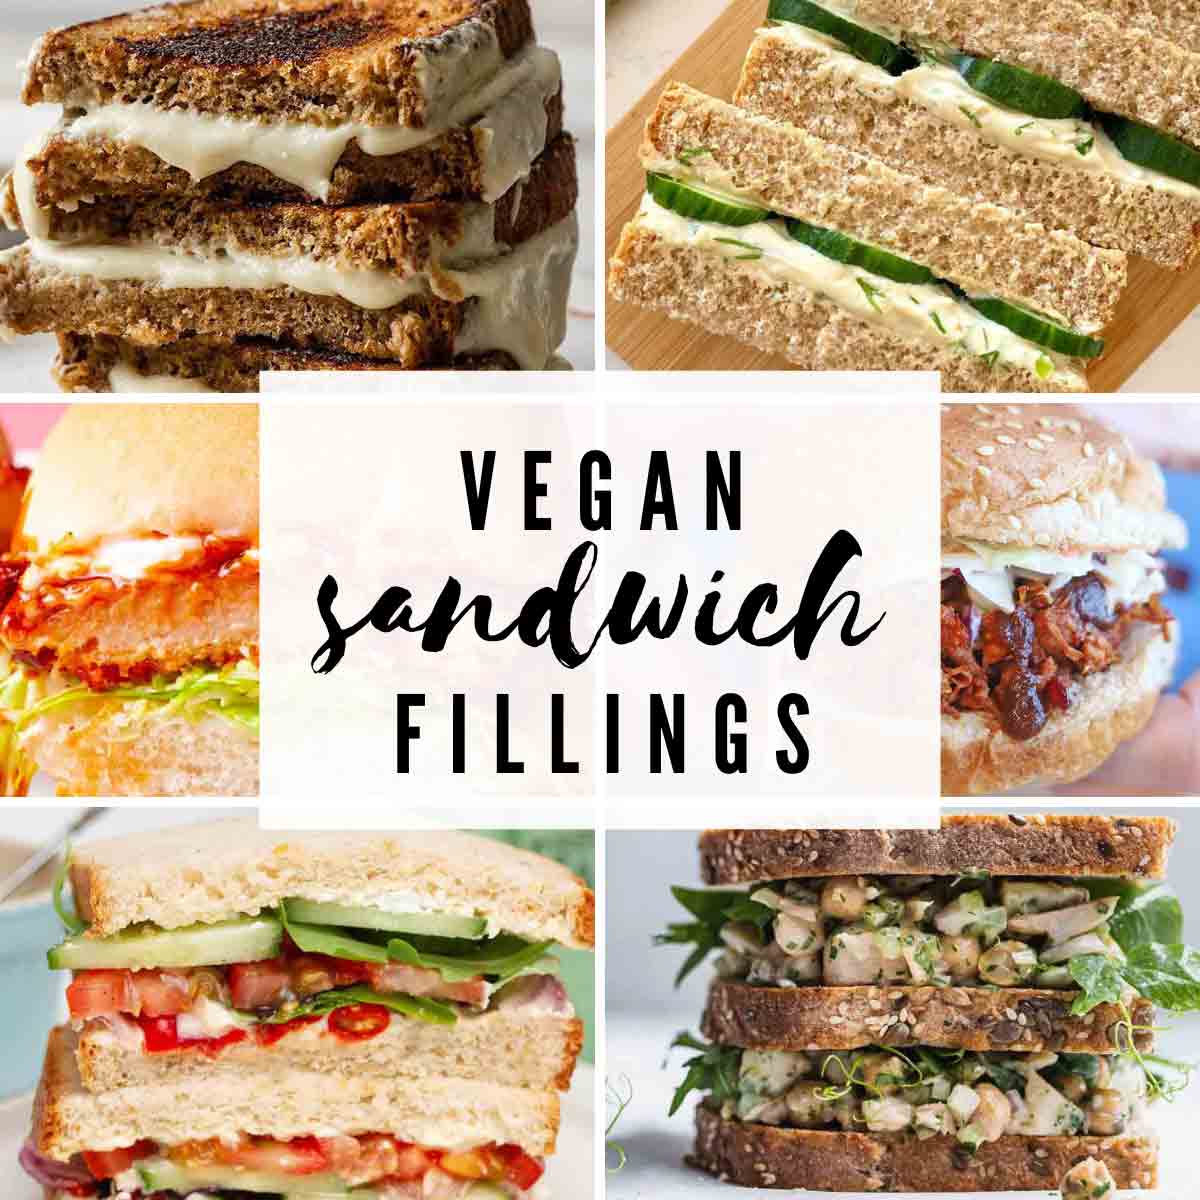 Sandwich Images With Text Overlay That Reads 'vegan Sandwich Fillings'